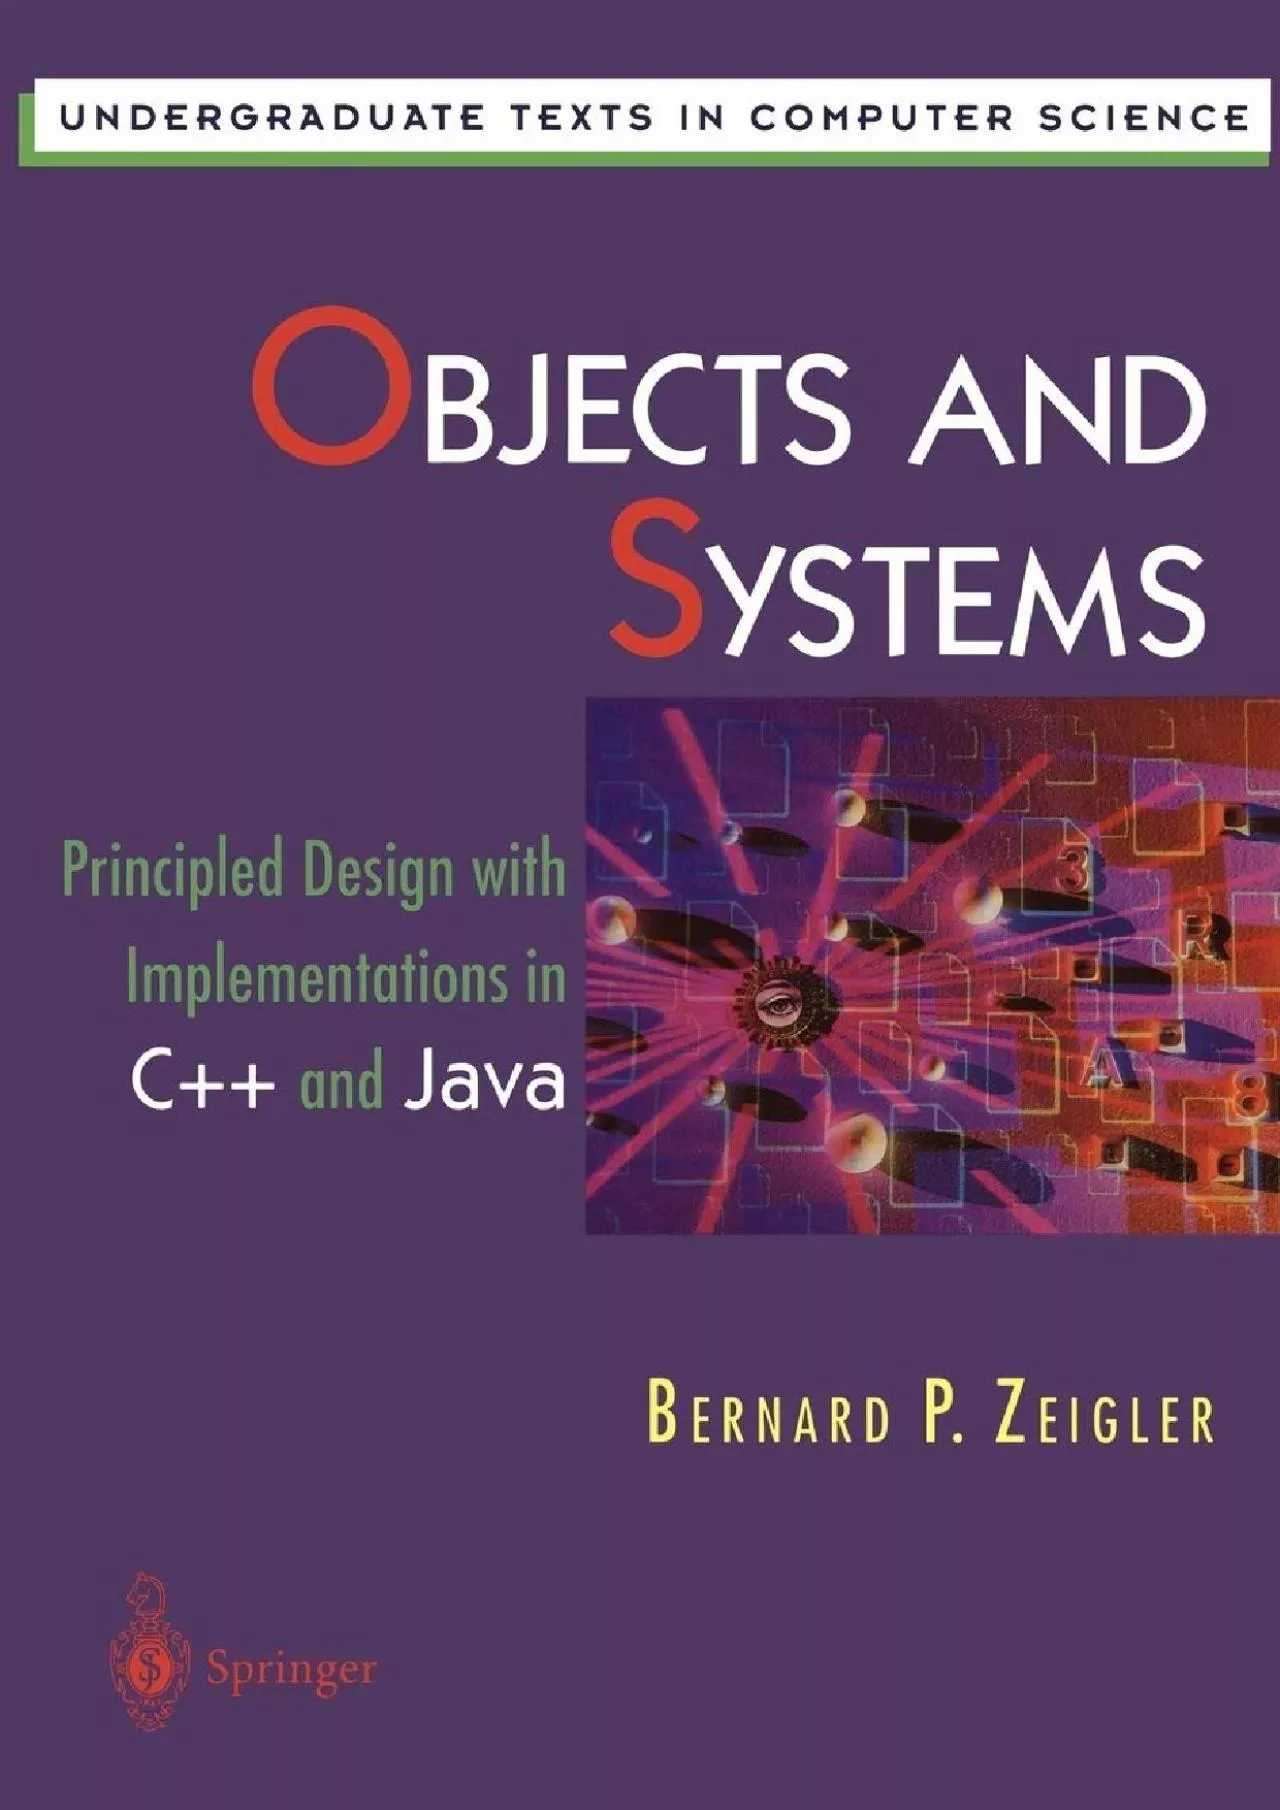 [FREE]-Objects and Systems: Principled Design with Implementations in C++ and Java (Undergraduate